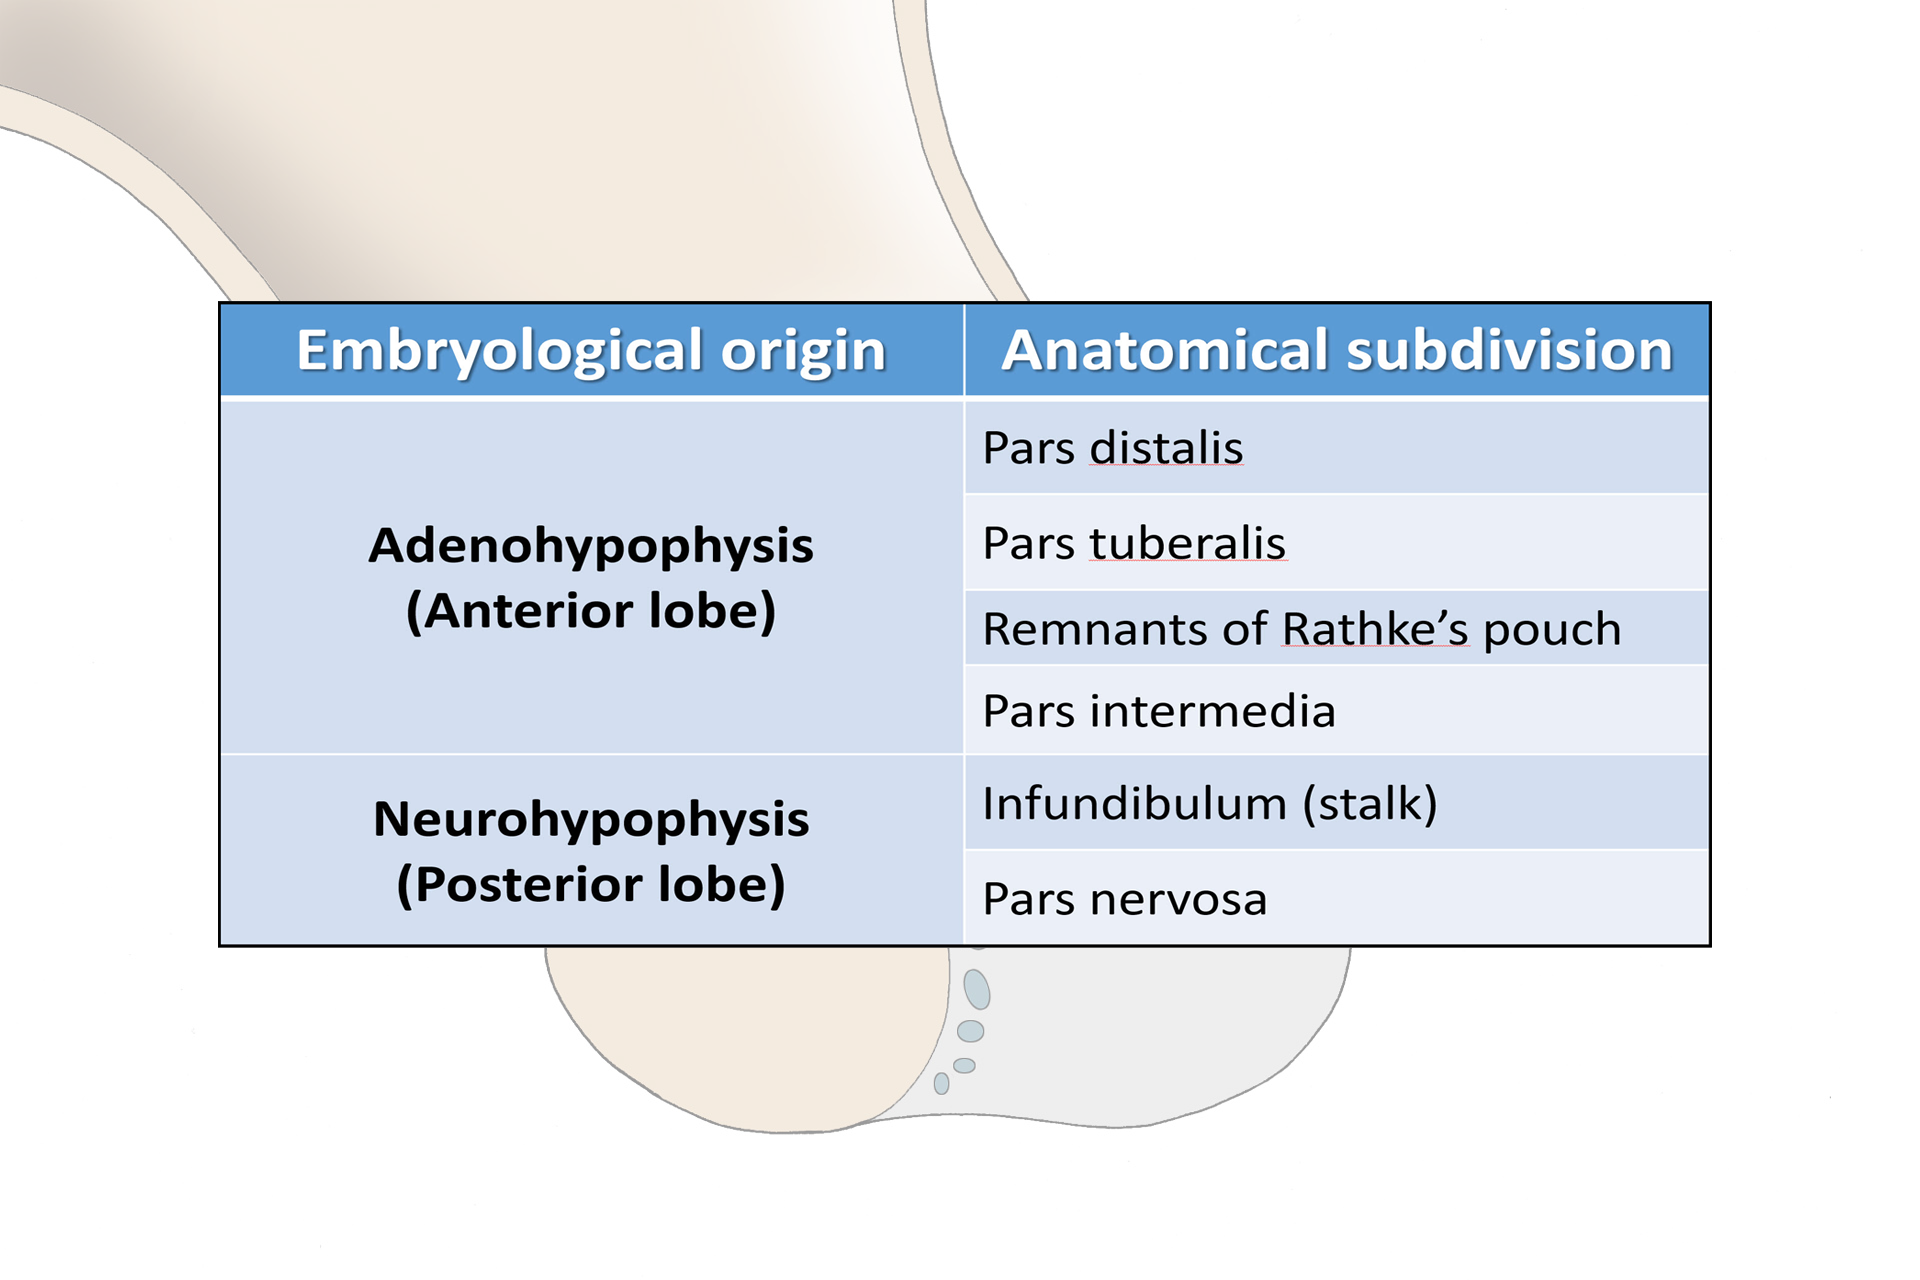 Subdivision summary > <p>Terminologies for the components of the pituitary gland are based on the embryological origins of the main subdivisions as well as the anatomical regions of each.  In clinical reference, the term anterior pituitary is often used synonymously with pars distalis and posterior pituitary is frequently used synonymously with pars nervosa.</p>
